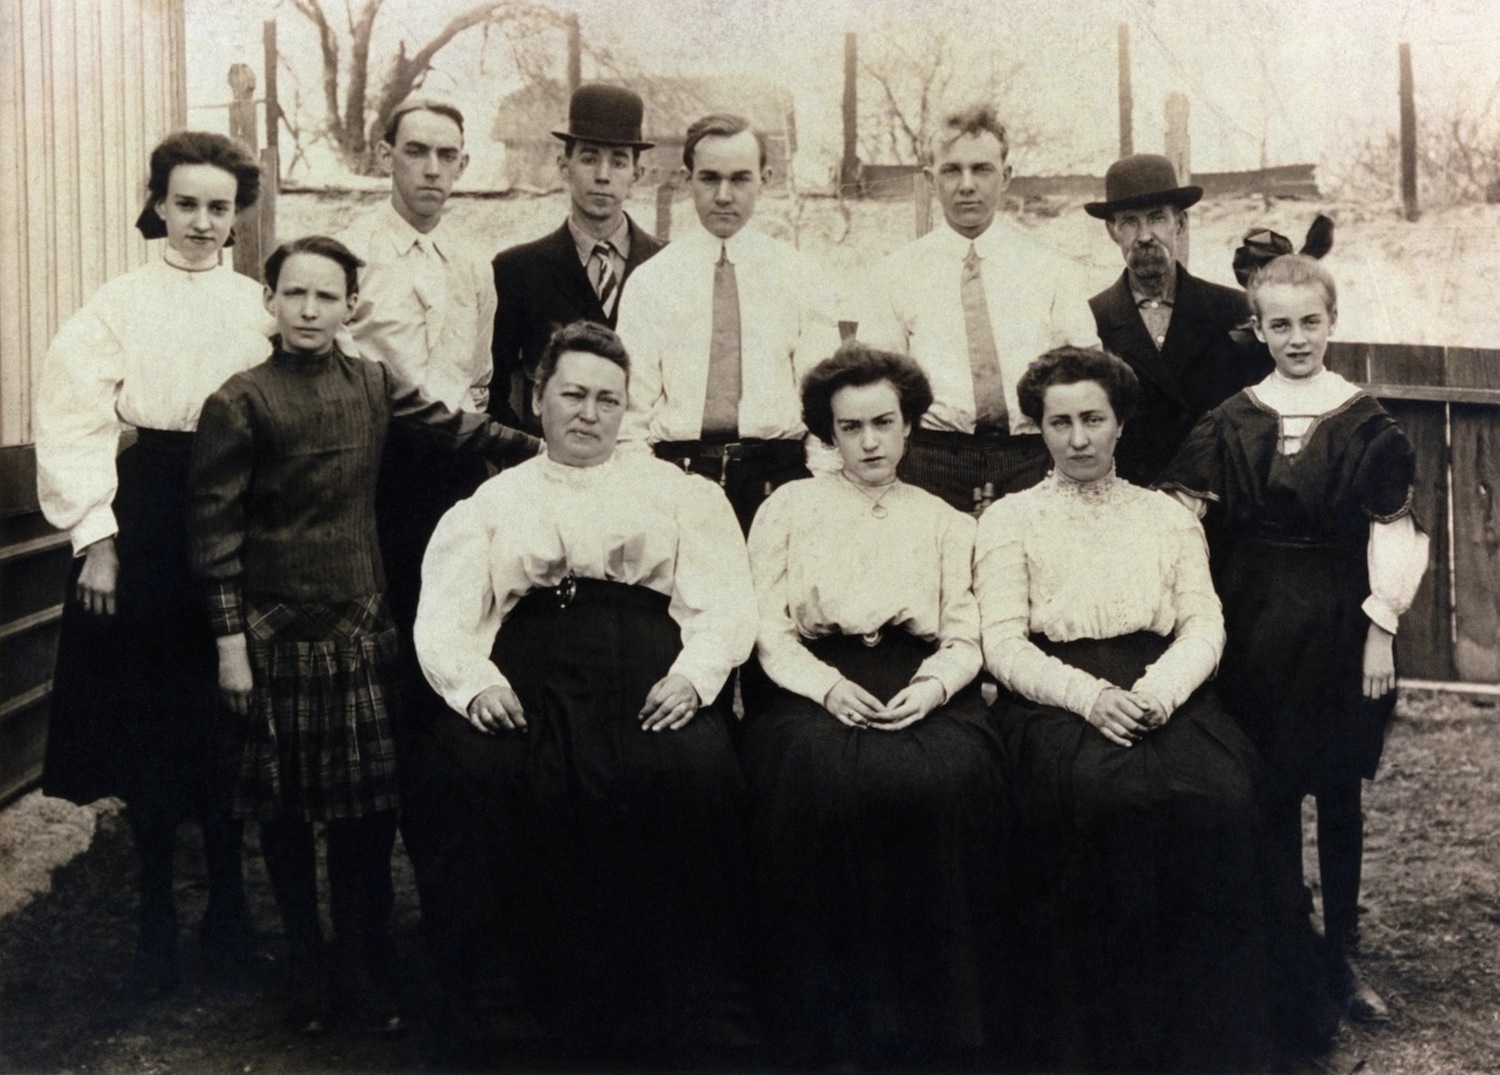 The Harrington family in St. Louis, MO, 1910. Patrick (man at far right) came to America from Ireland in 1858, and fought in the Civil War in the Irish Brigade of Boston. Catherine Carney (third woman from left) was sent to America alone as a child during Ireland’s Great Famine. She and Patrick had eight kids, including my grandfather Charlie (left of Patrick) and (third man from right) Eddie, WWI veteran and father to famous American socialist Michael Harrington. View full size.
